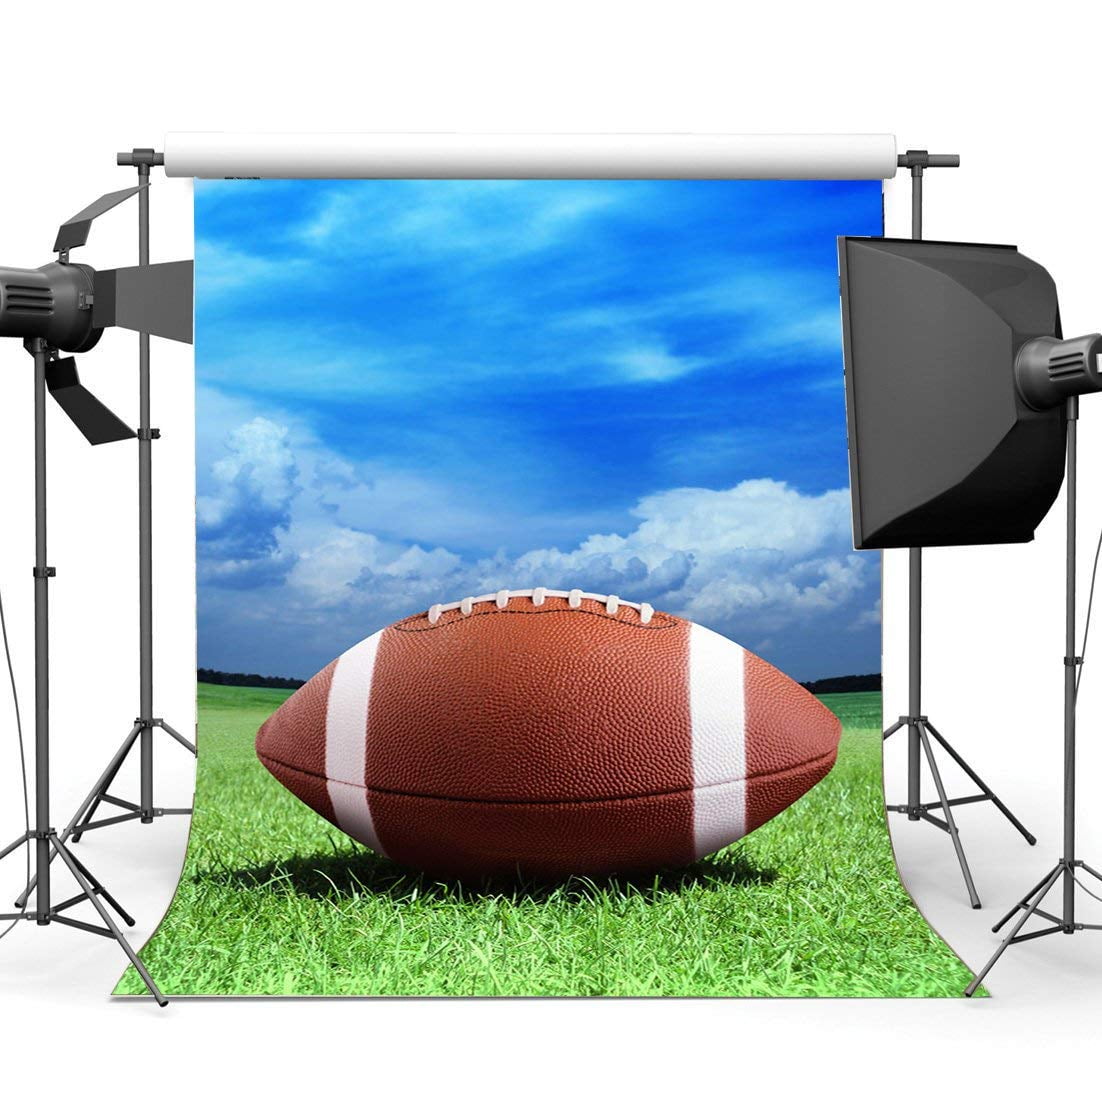 5X7FT Vinyl Photography Backdrop Football Field American Soccer Green Grass Stage Sports Theme Blue Sky White Cloud Background Kids Children Boys Adults Photo Studio Props